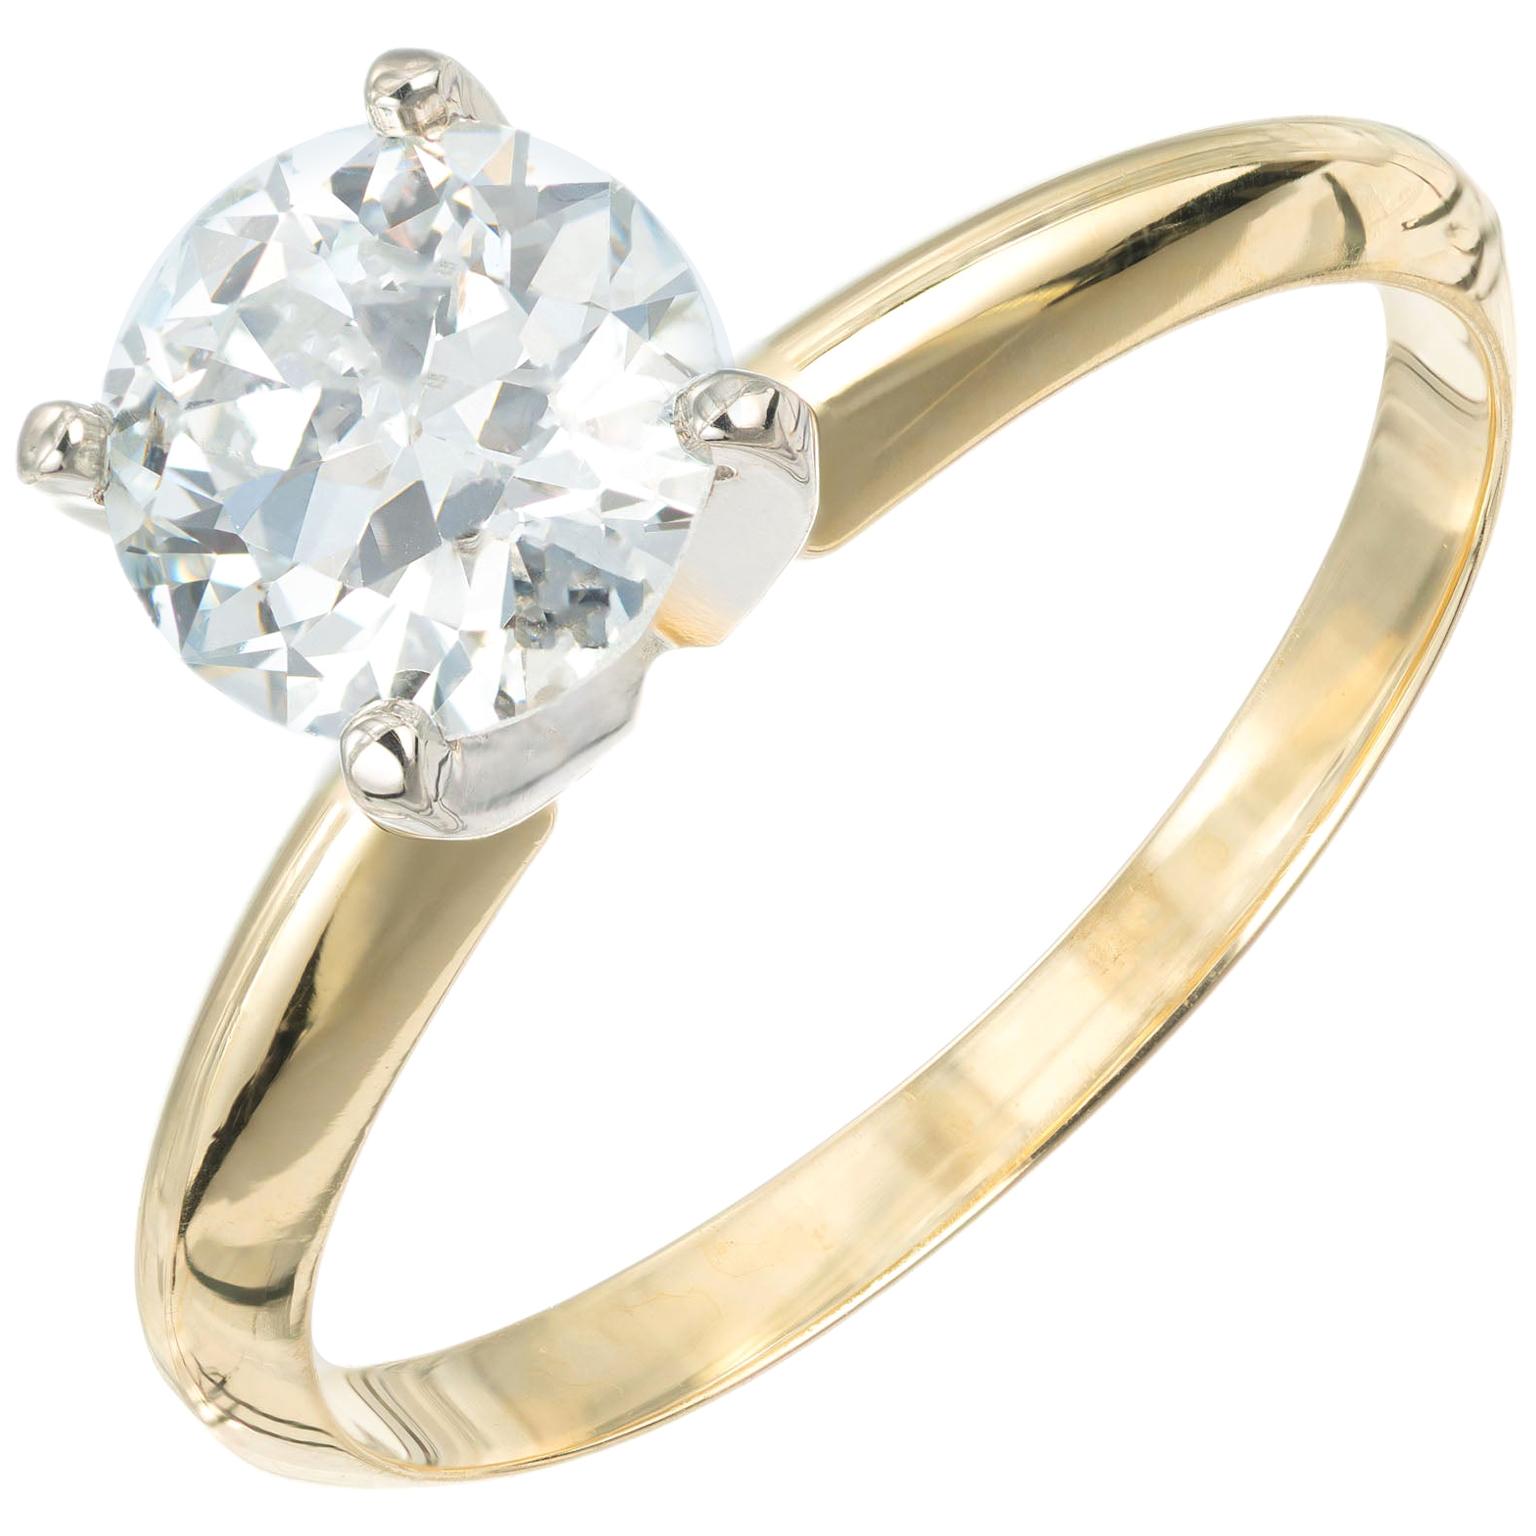 Peter Suchy GIA Certified 1.09 Carat Diamond Gold Solitaire Engagement Ring